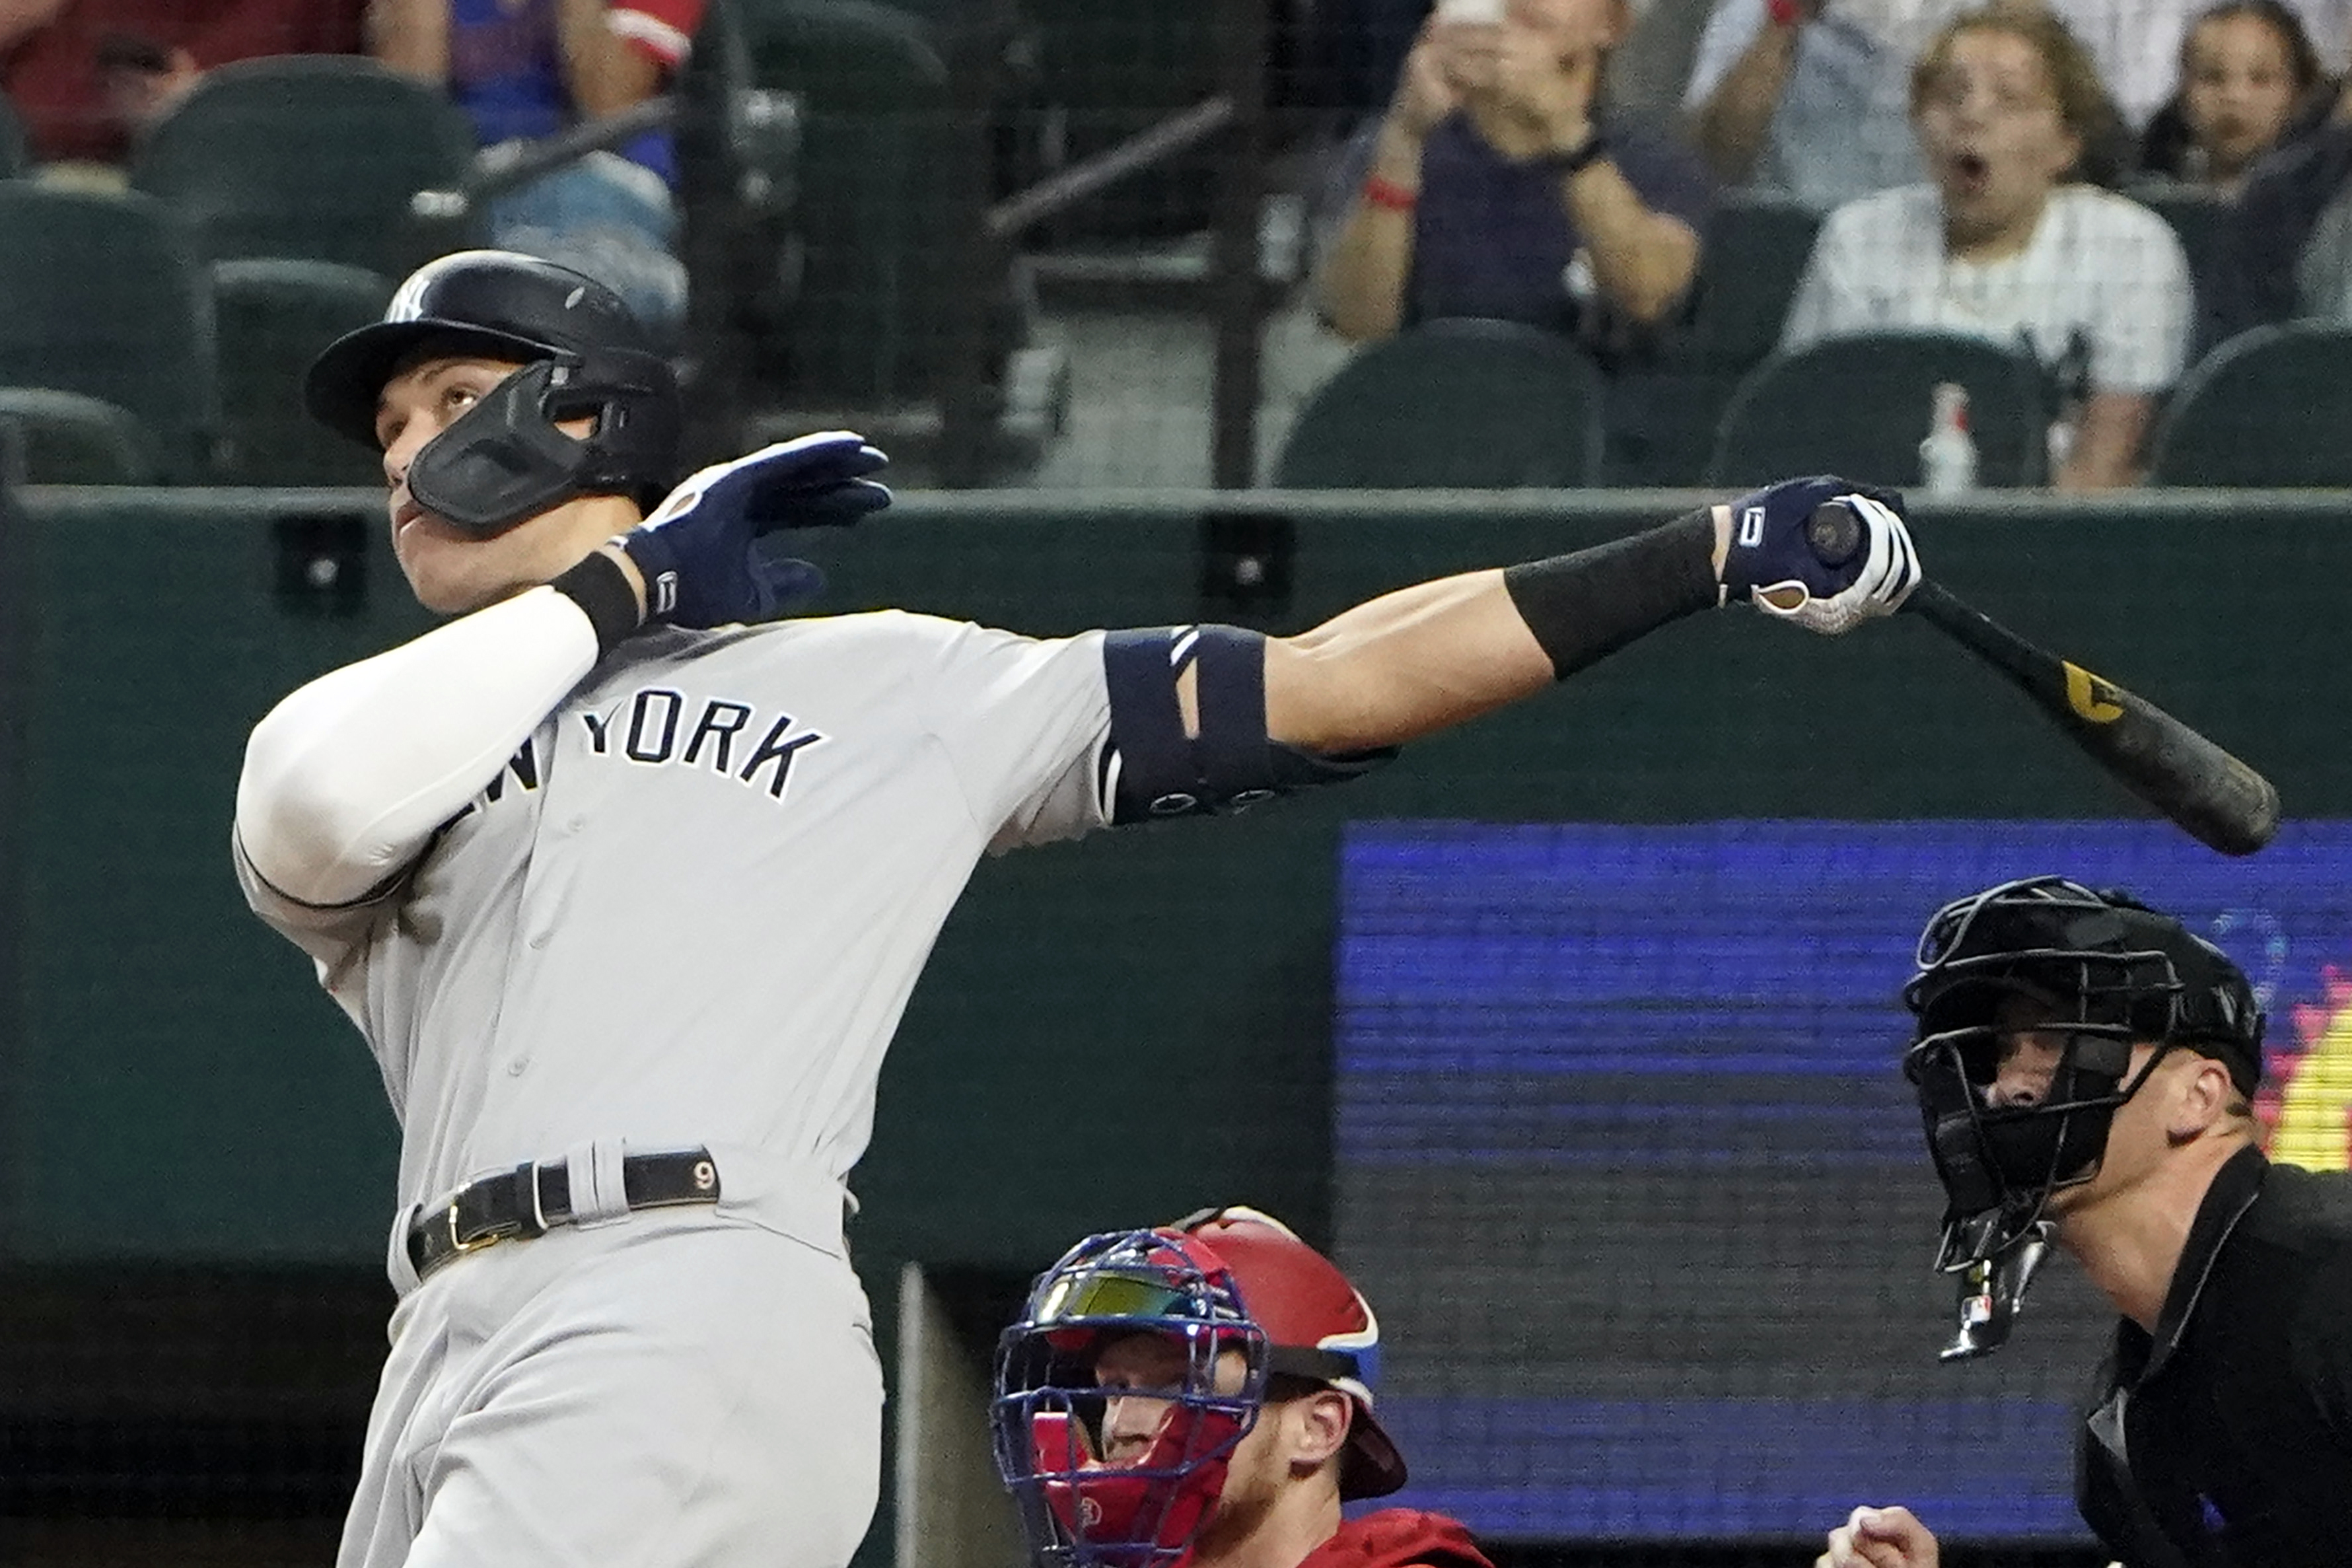 New York Yankees: Judge's swing is a Home Run Derby Miracle